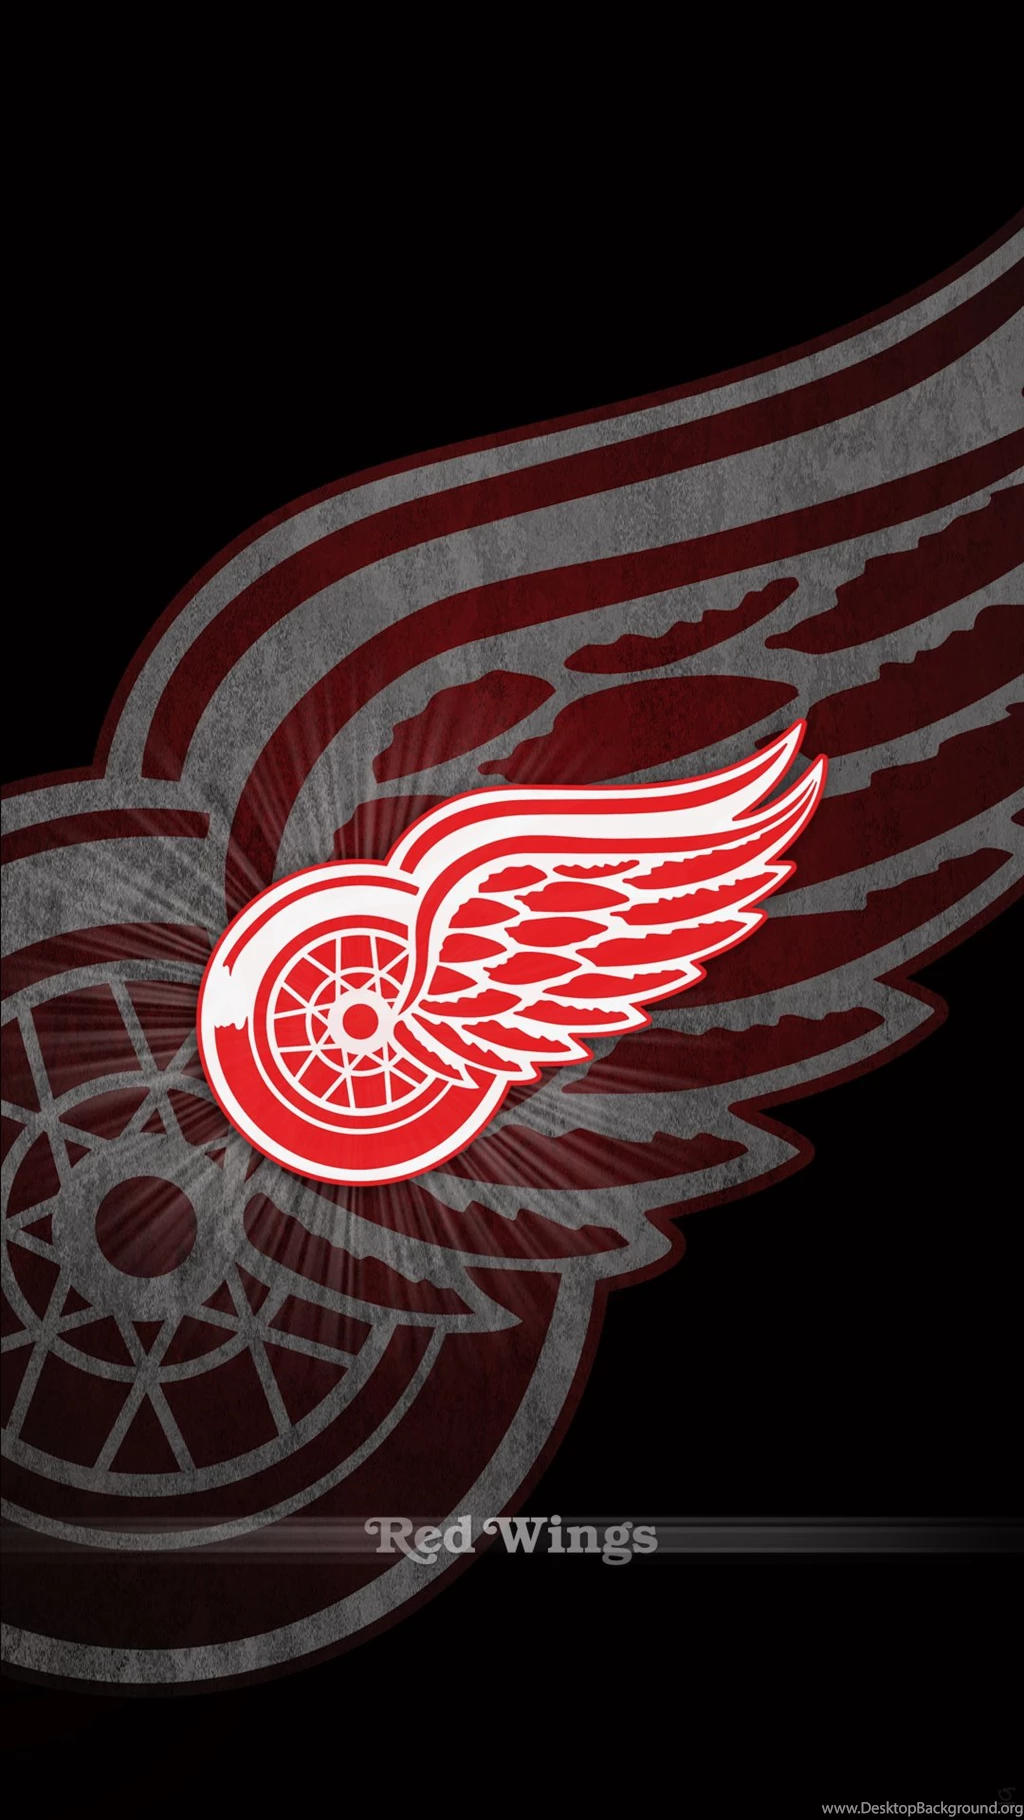 Detroit Red Wings Iphone 6 Wallpapers Pictures Desktop Background